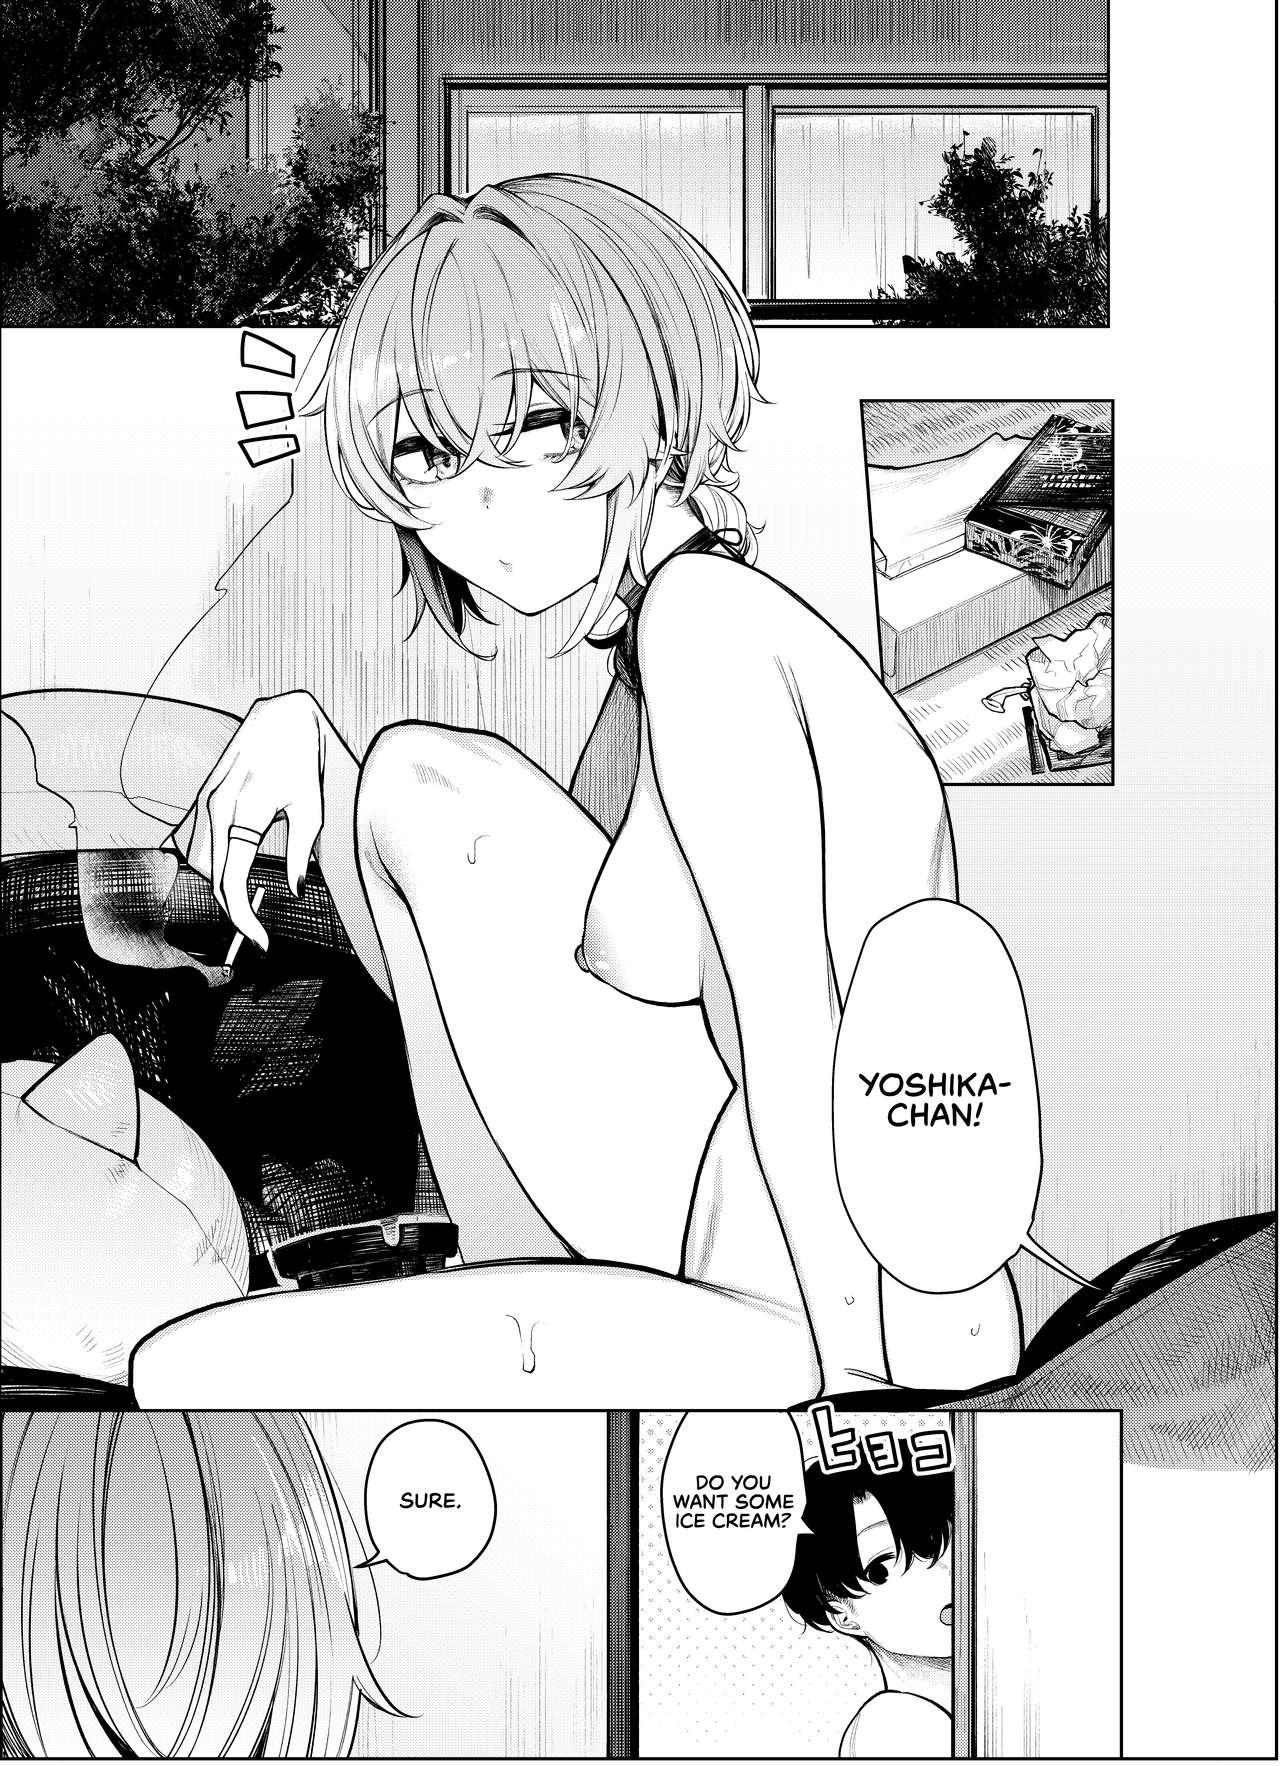 Gay Orgy Furyouppoi Kanojo to Daradara Omocha de Mou Ikkai. | Leisurely Playing With Sex Toys With My Delinquent-looking Girlfriend, Yet Again. - Original Tight Ass - Page 6